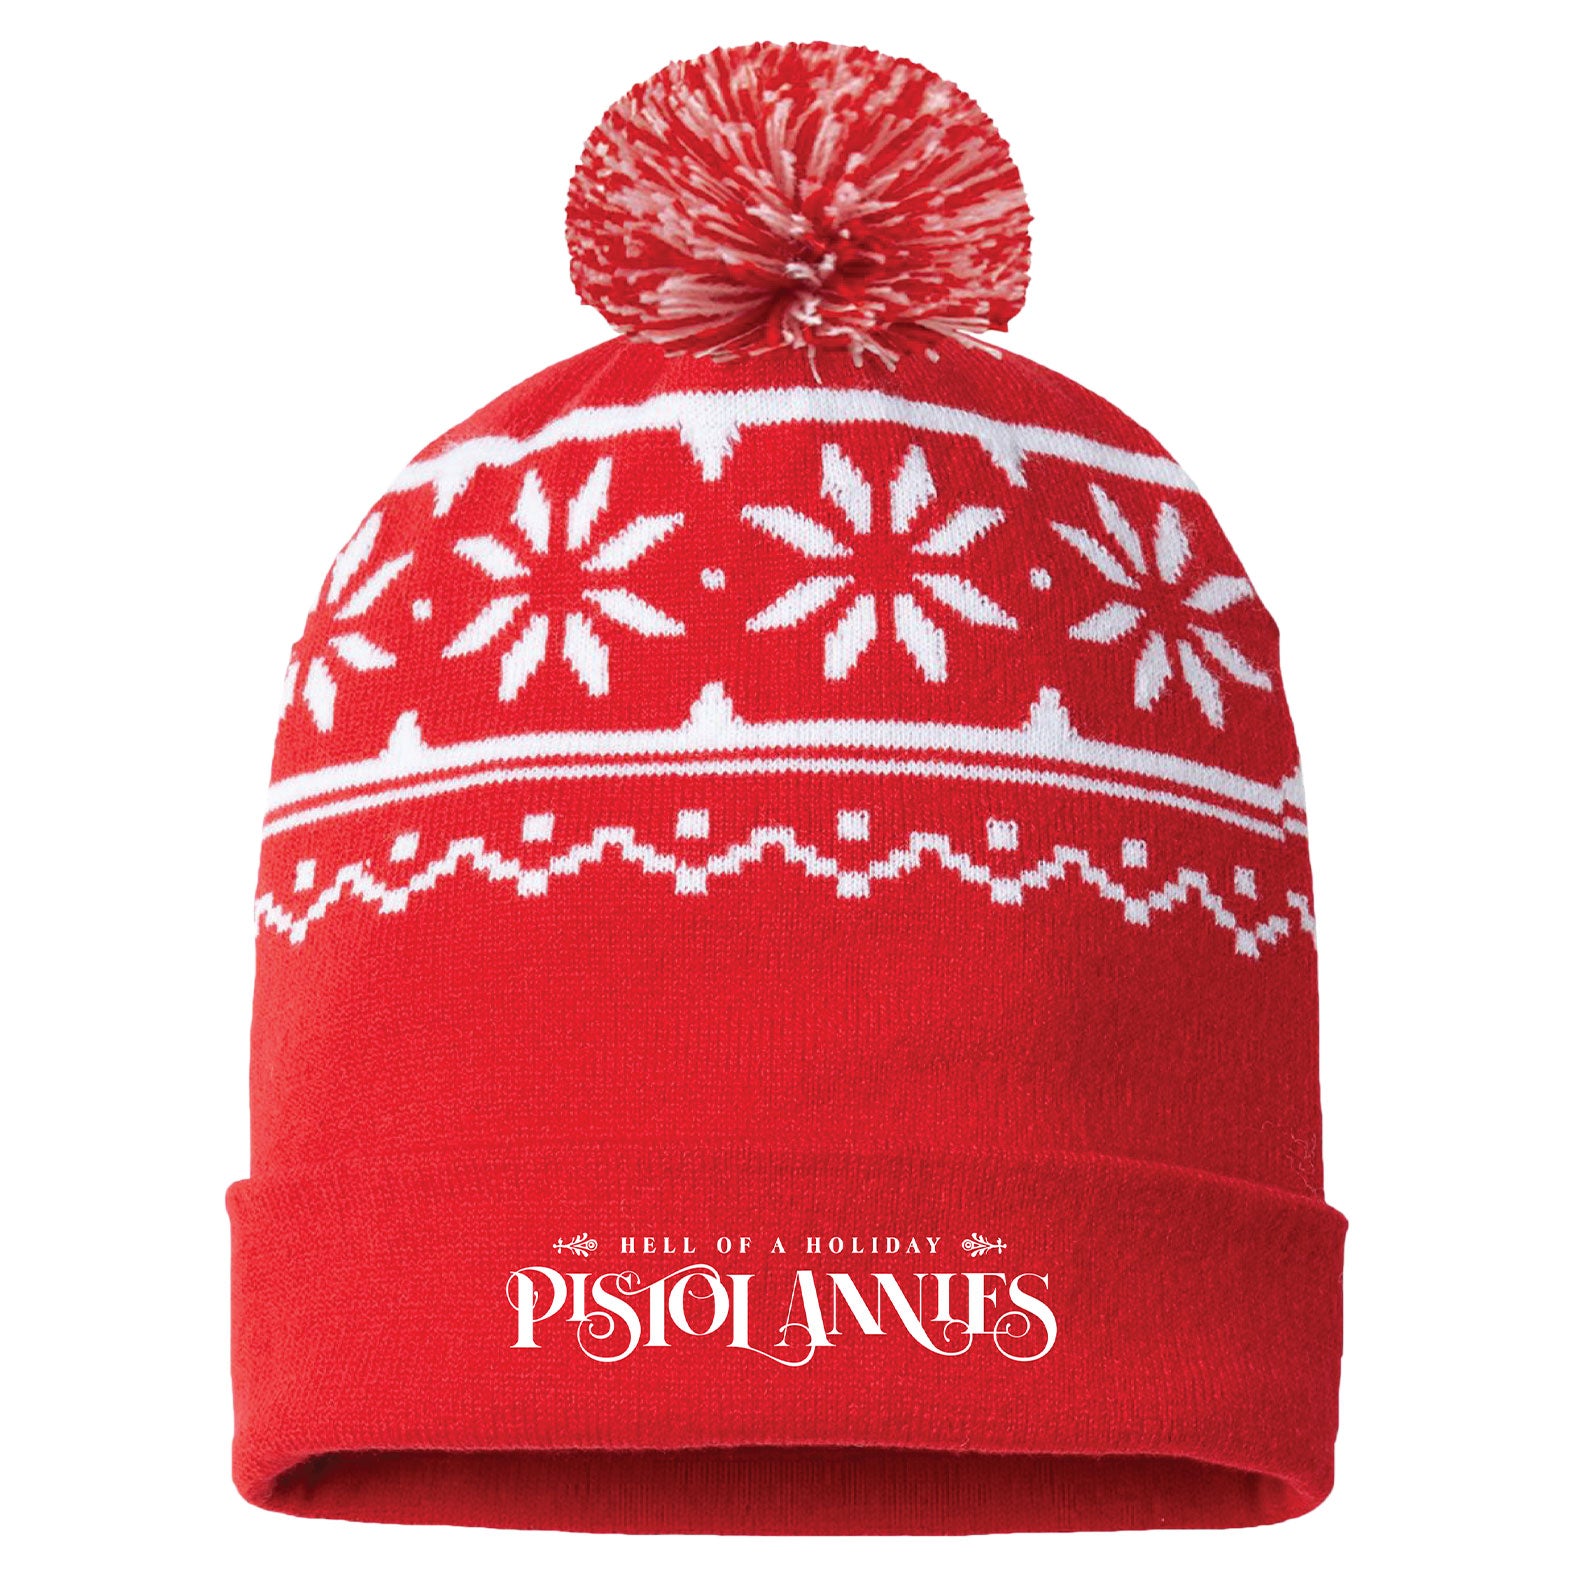 Beanie with festive design and "Hell of a Holiday, Pistol Annies"